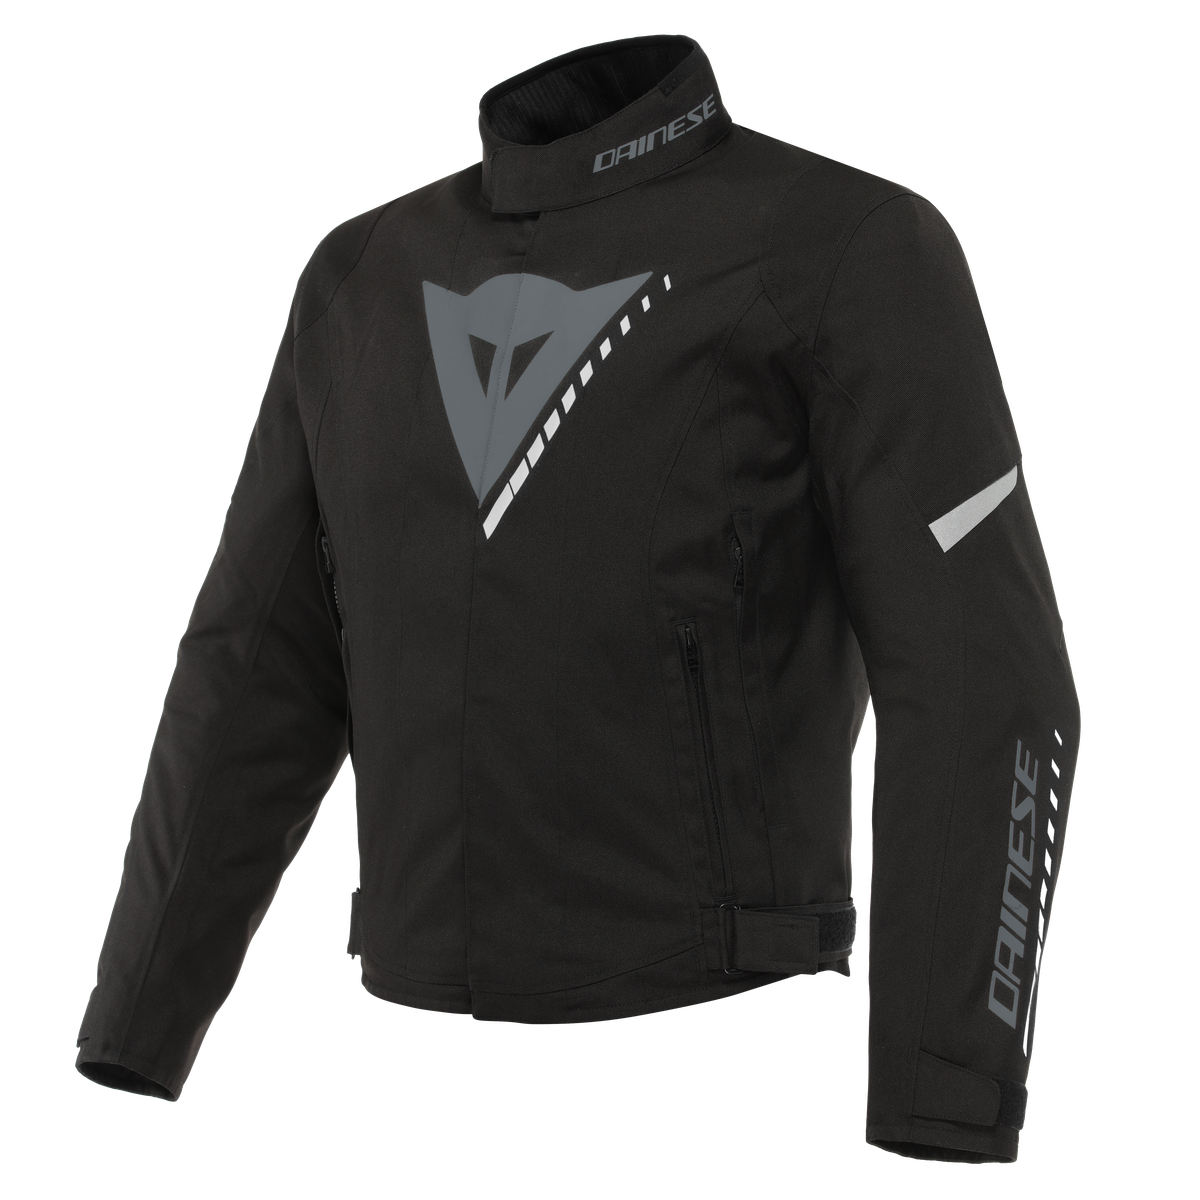 Image of Dainese Veloce D-Dry Jacket Black Charcoal Gray White Size 56 ID 8051019387431